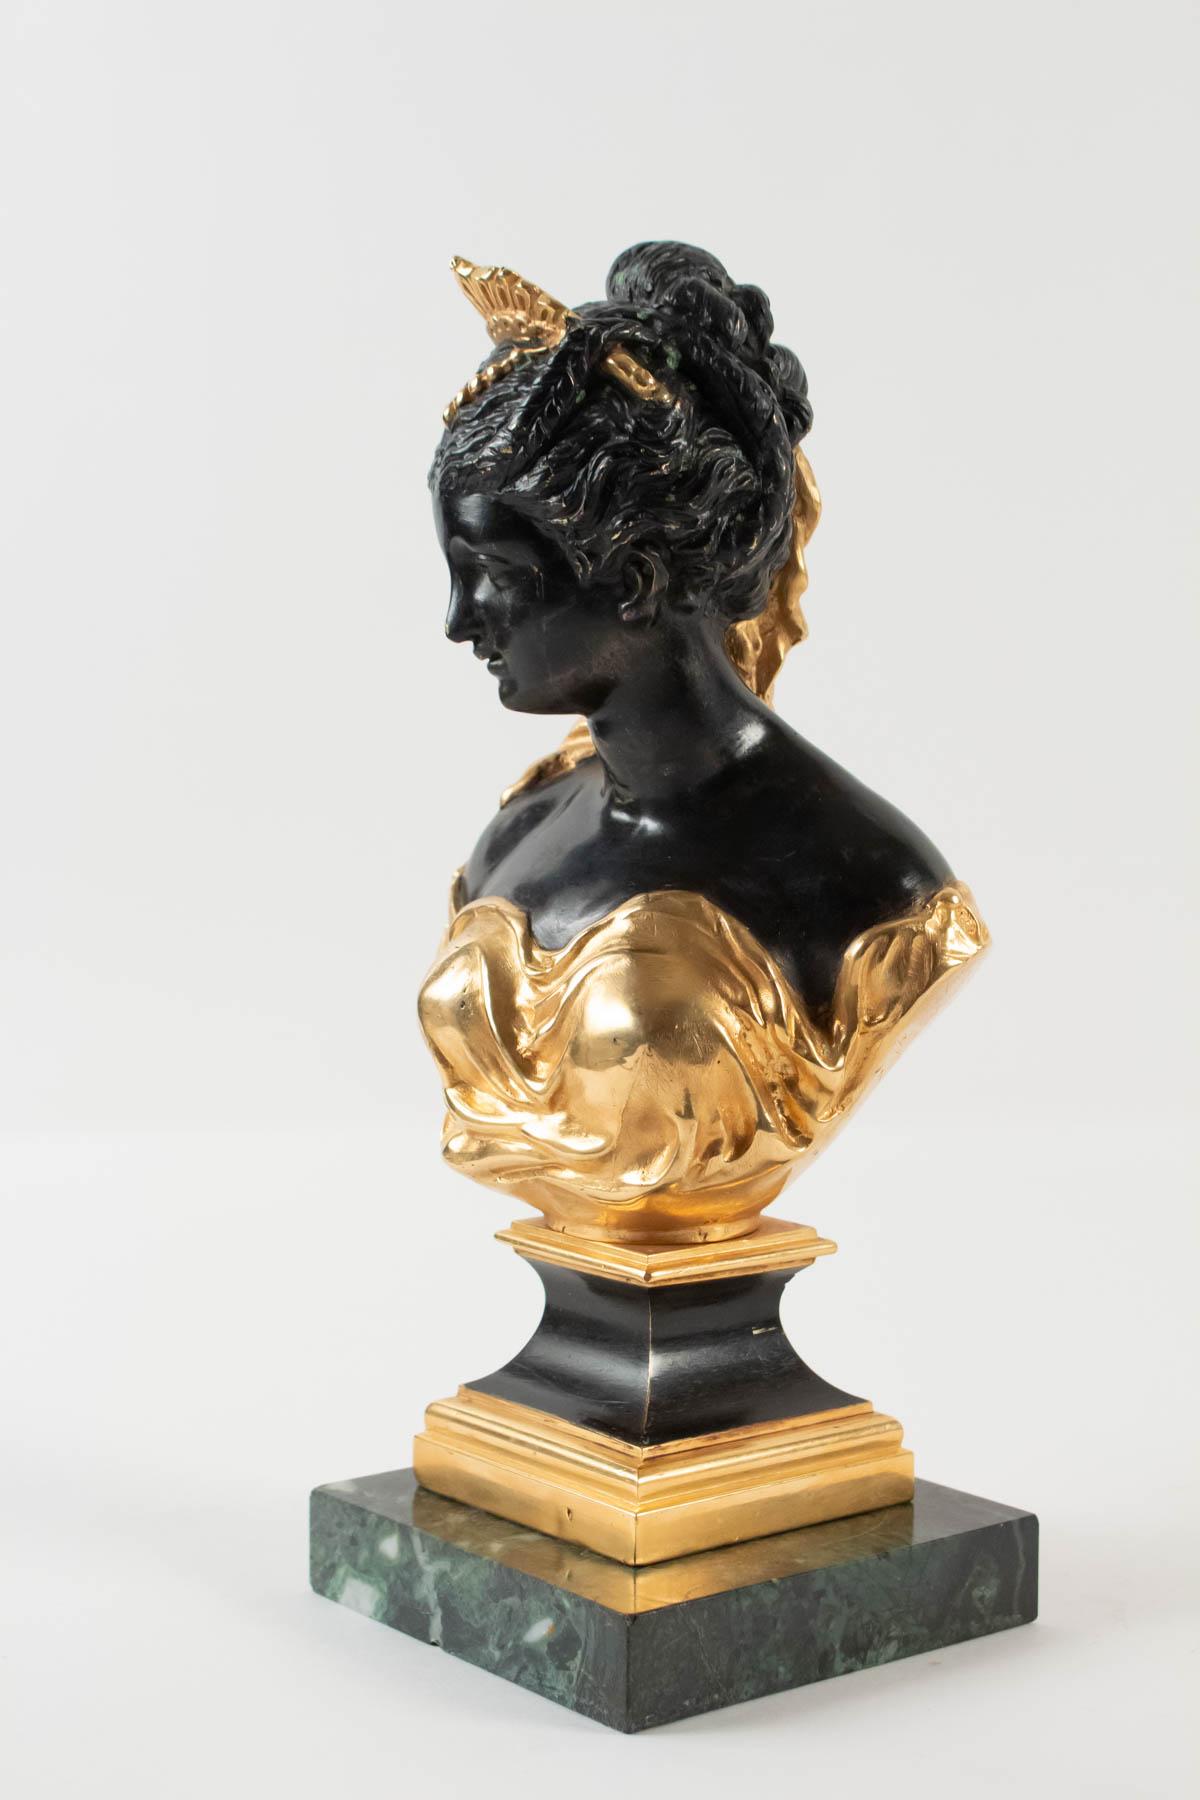 French Bronze Sculpture Double Patinas, Brown and Golden from the 19th Century